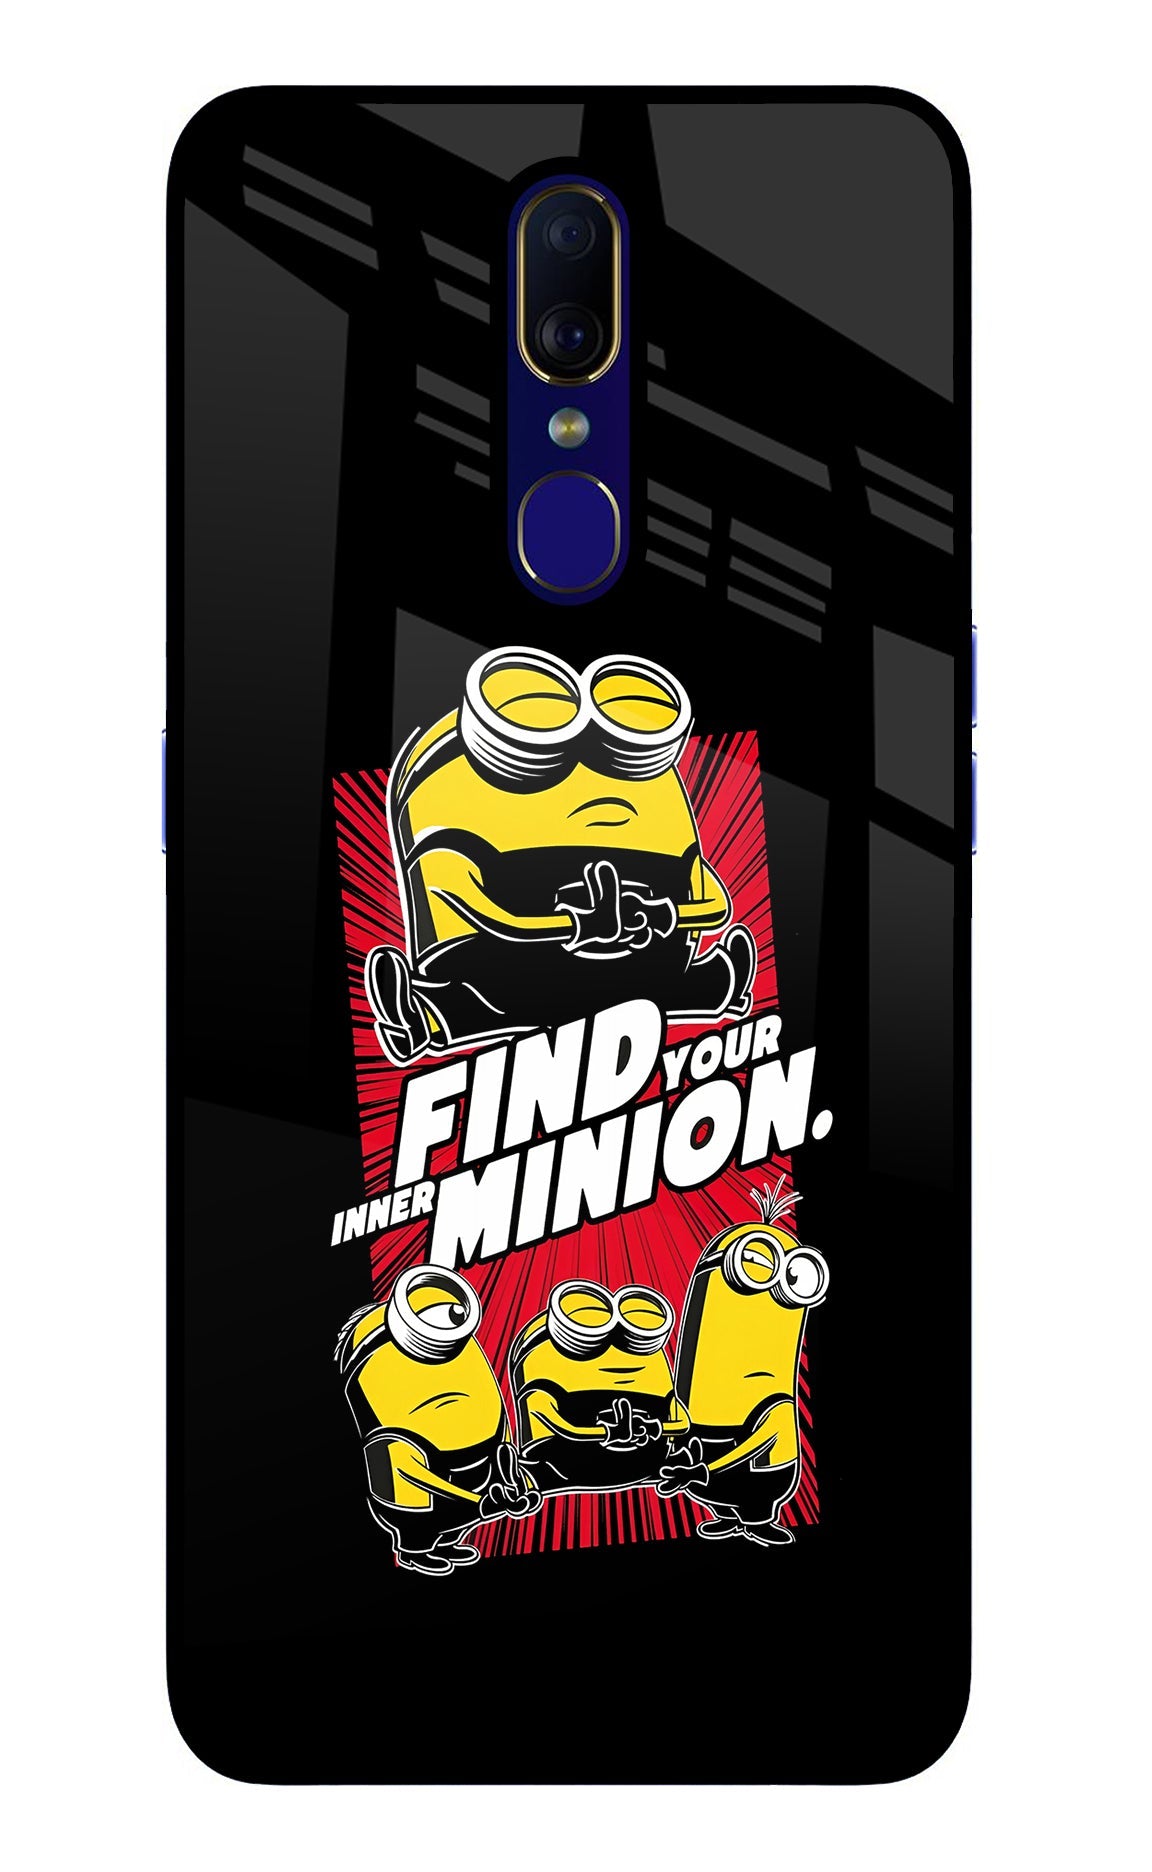 Find your inner Minion Oppo F11 Glass Case